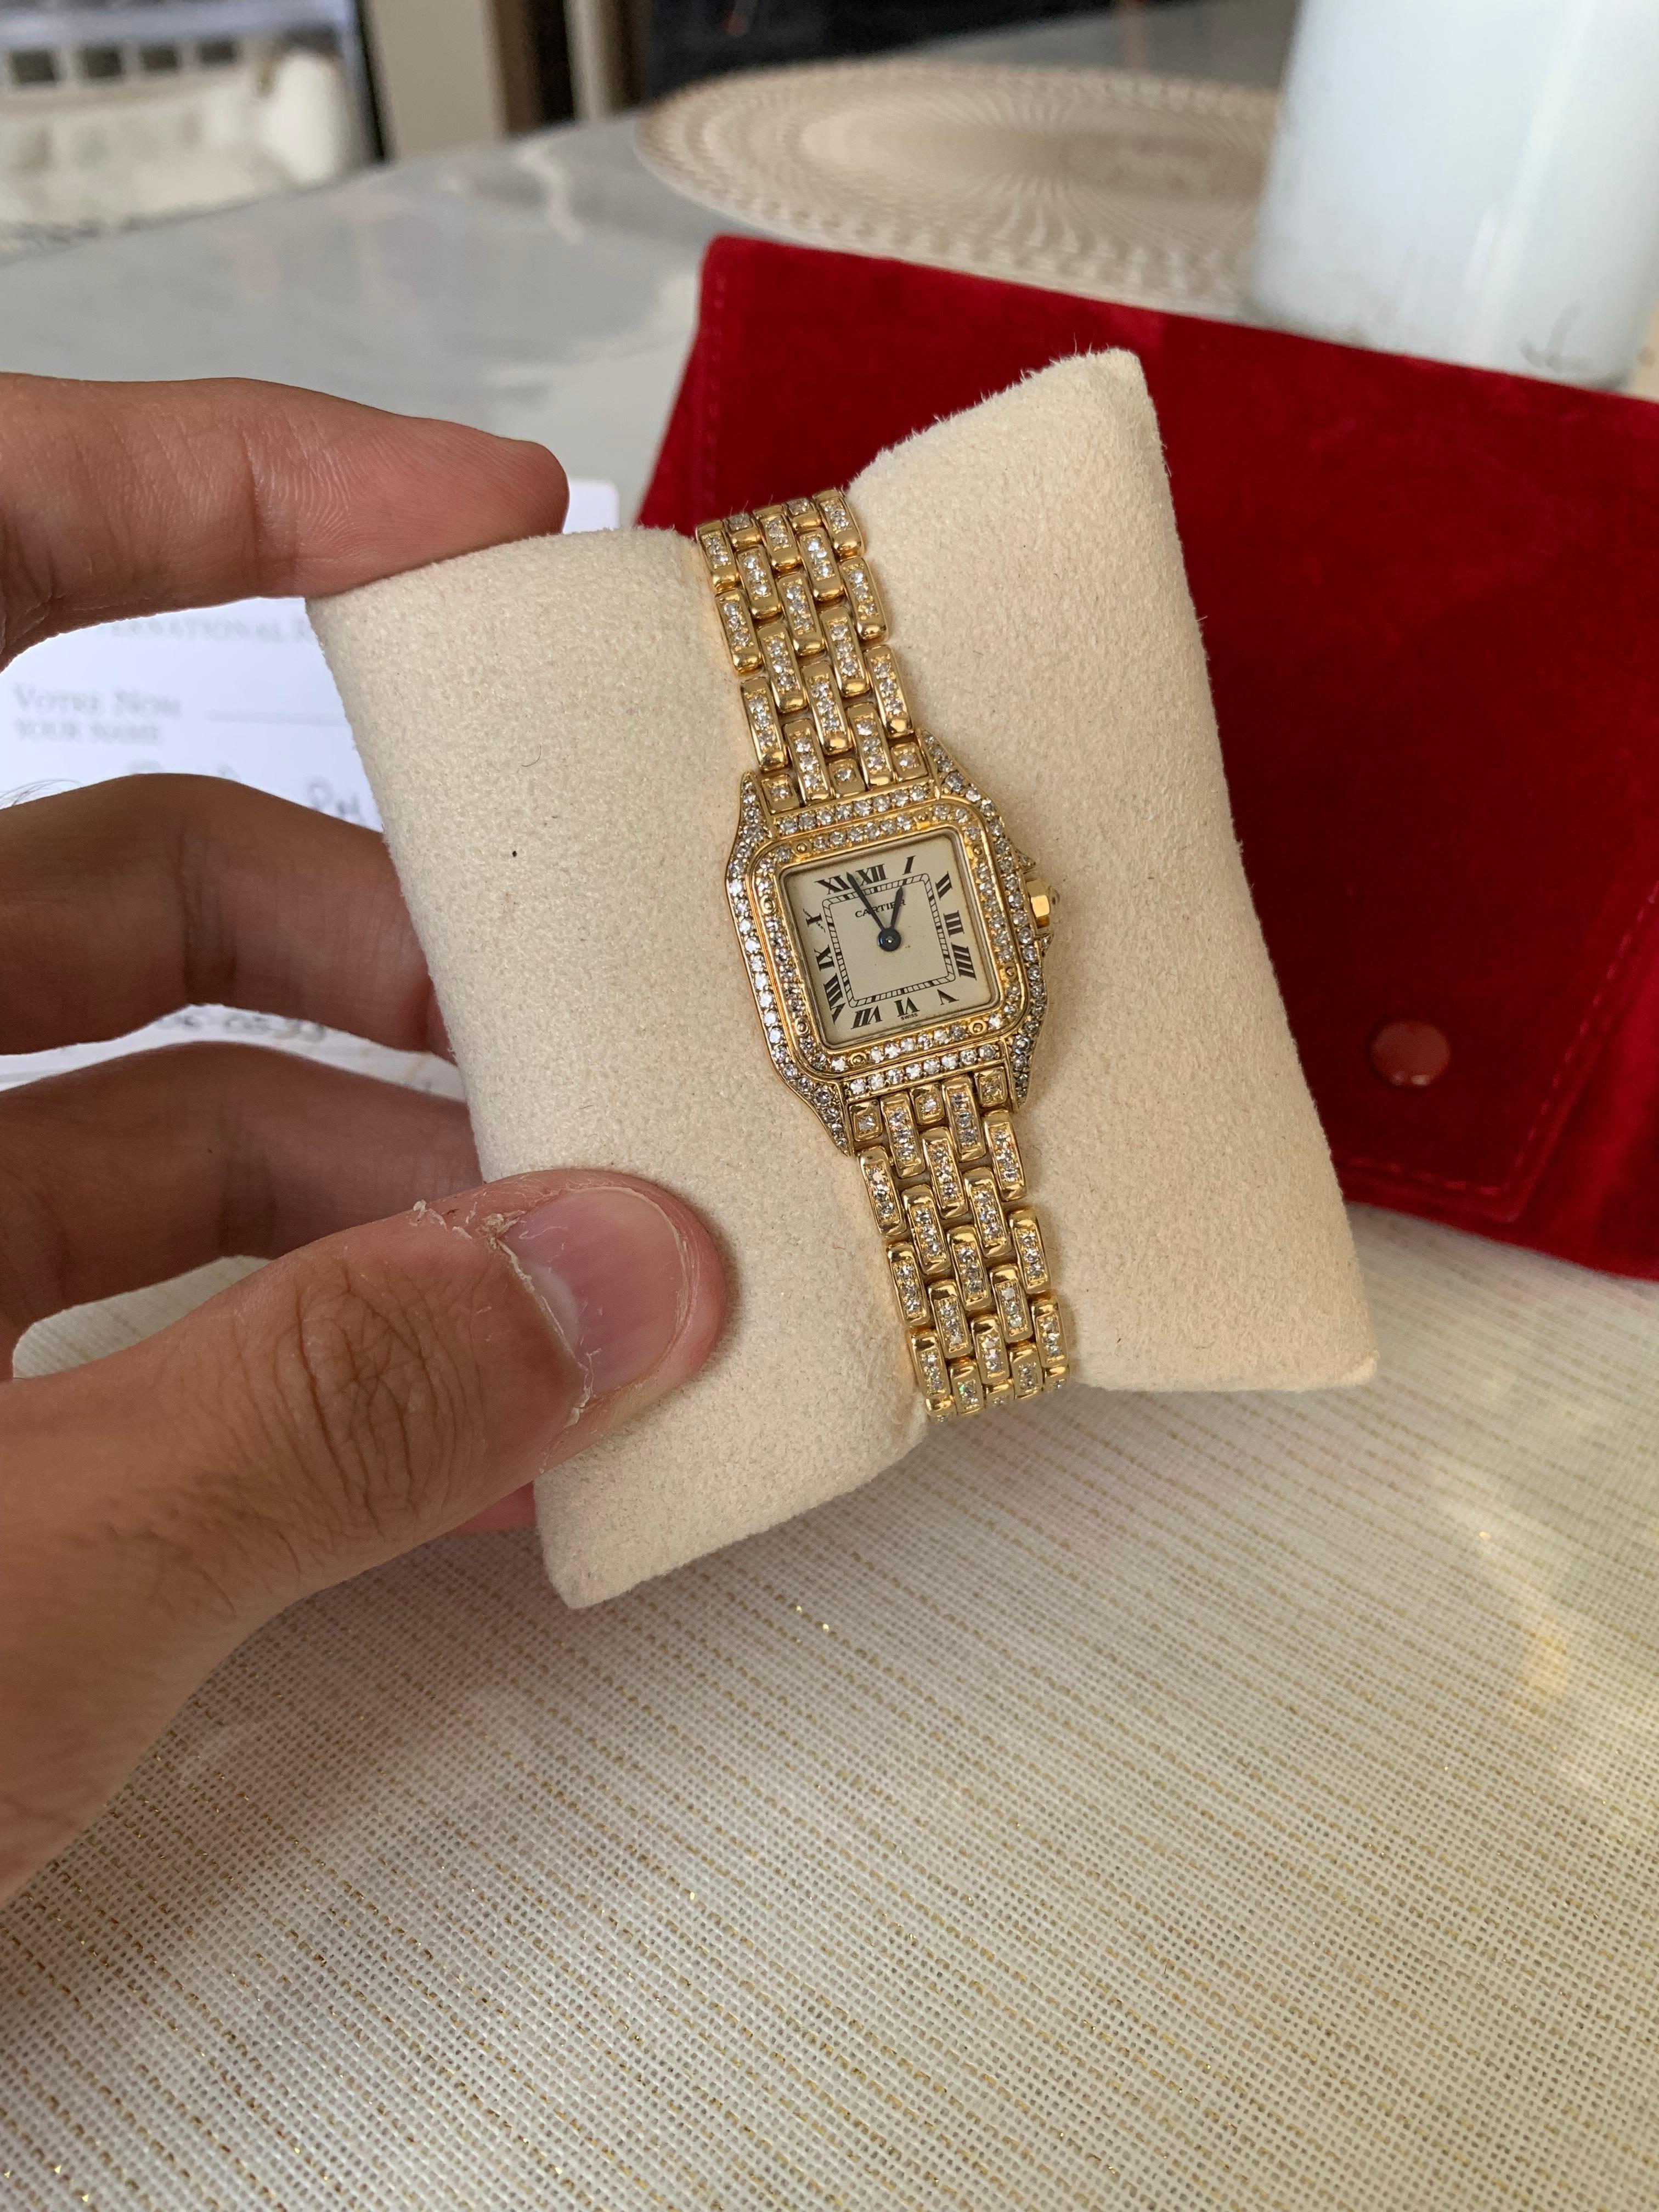 Cartier Panthere, Swiss Made, In 18k Solid Yellow Gold, Factory Set With Diamonds All Along The Case, Bezel & Bracelet By Cartier.
Rare & Popular Model.
Amazing Shine, Incredible Craftsmanship.
Has Service Papers From 1994.
Comes With Original